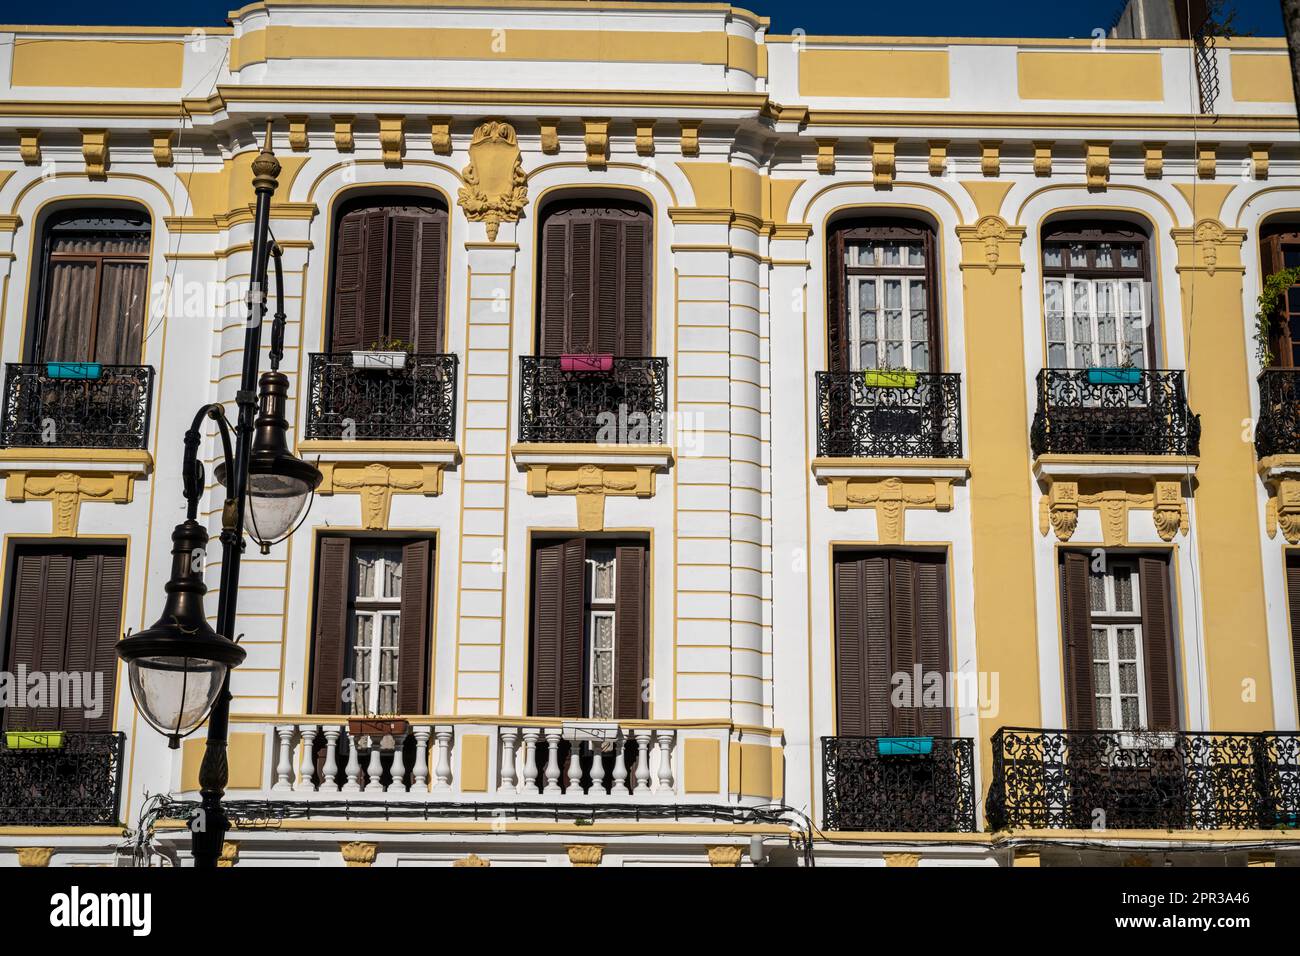 Colonial style buildings in the streets of Tanger. Stock Photo